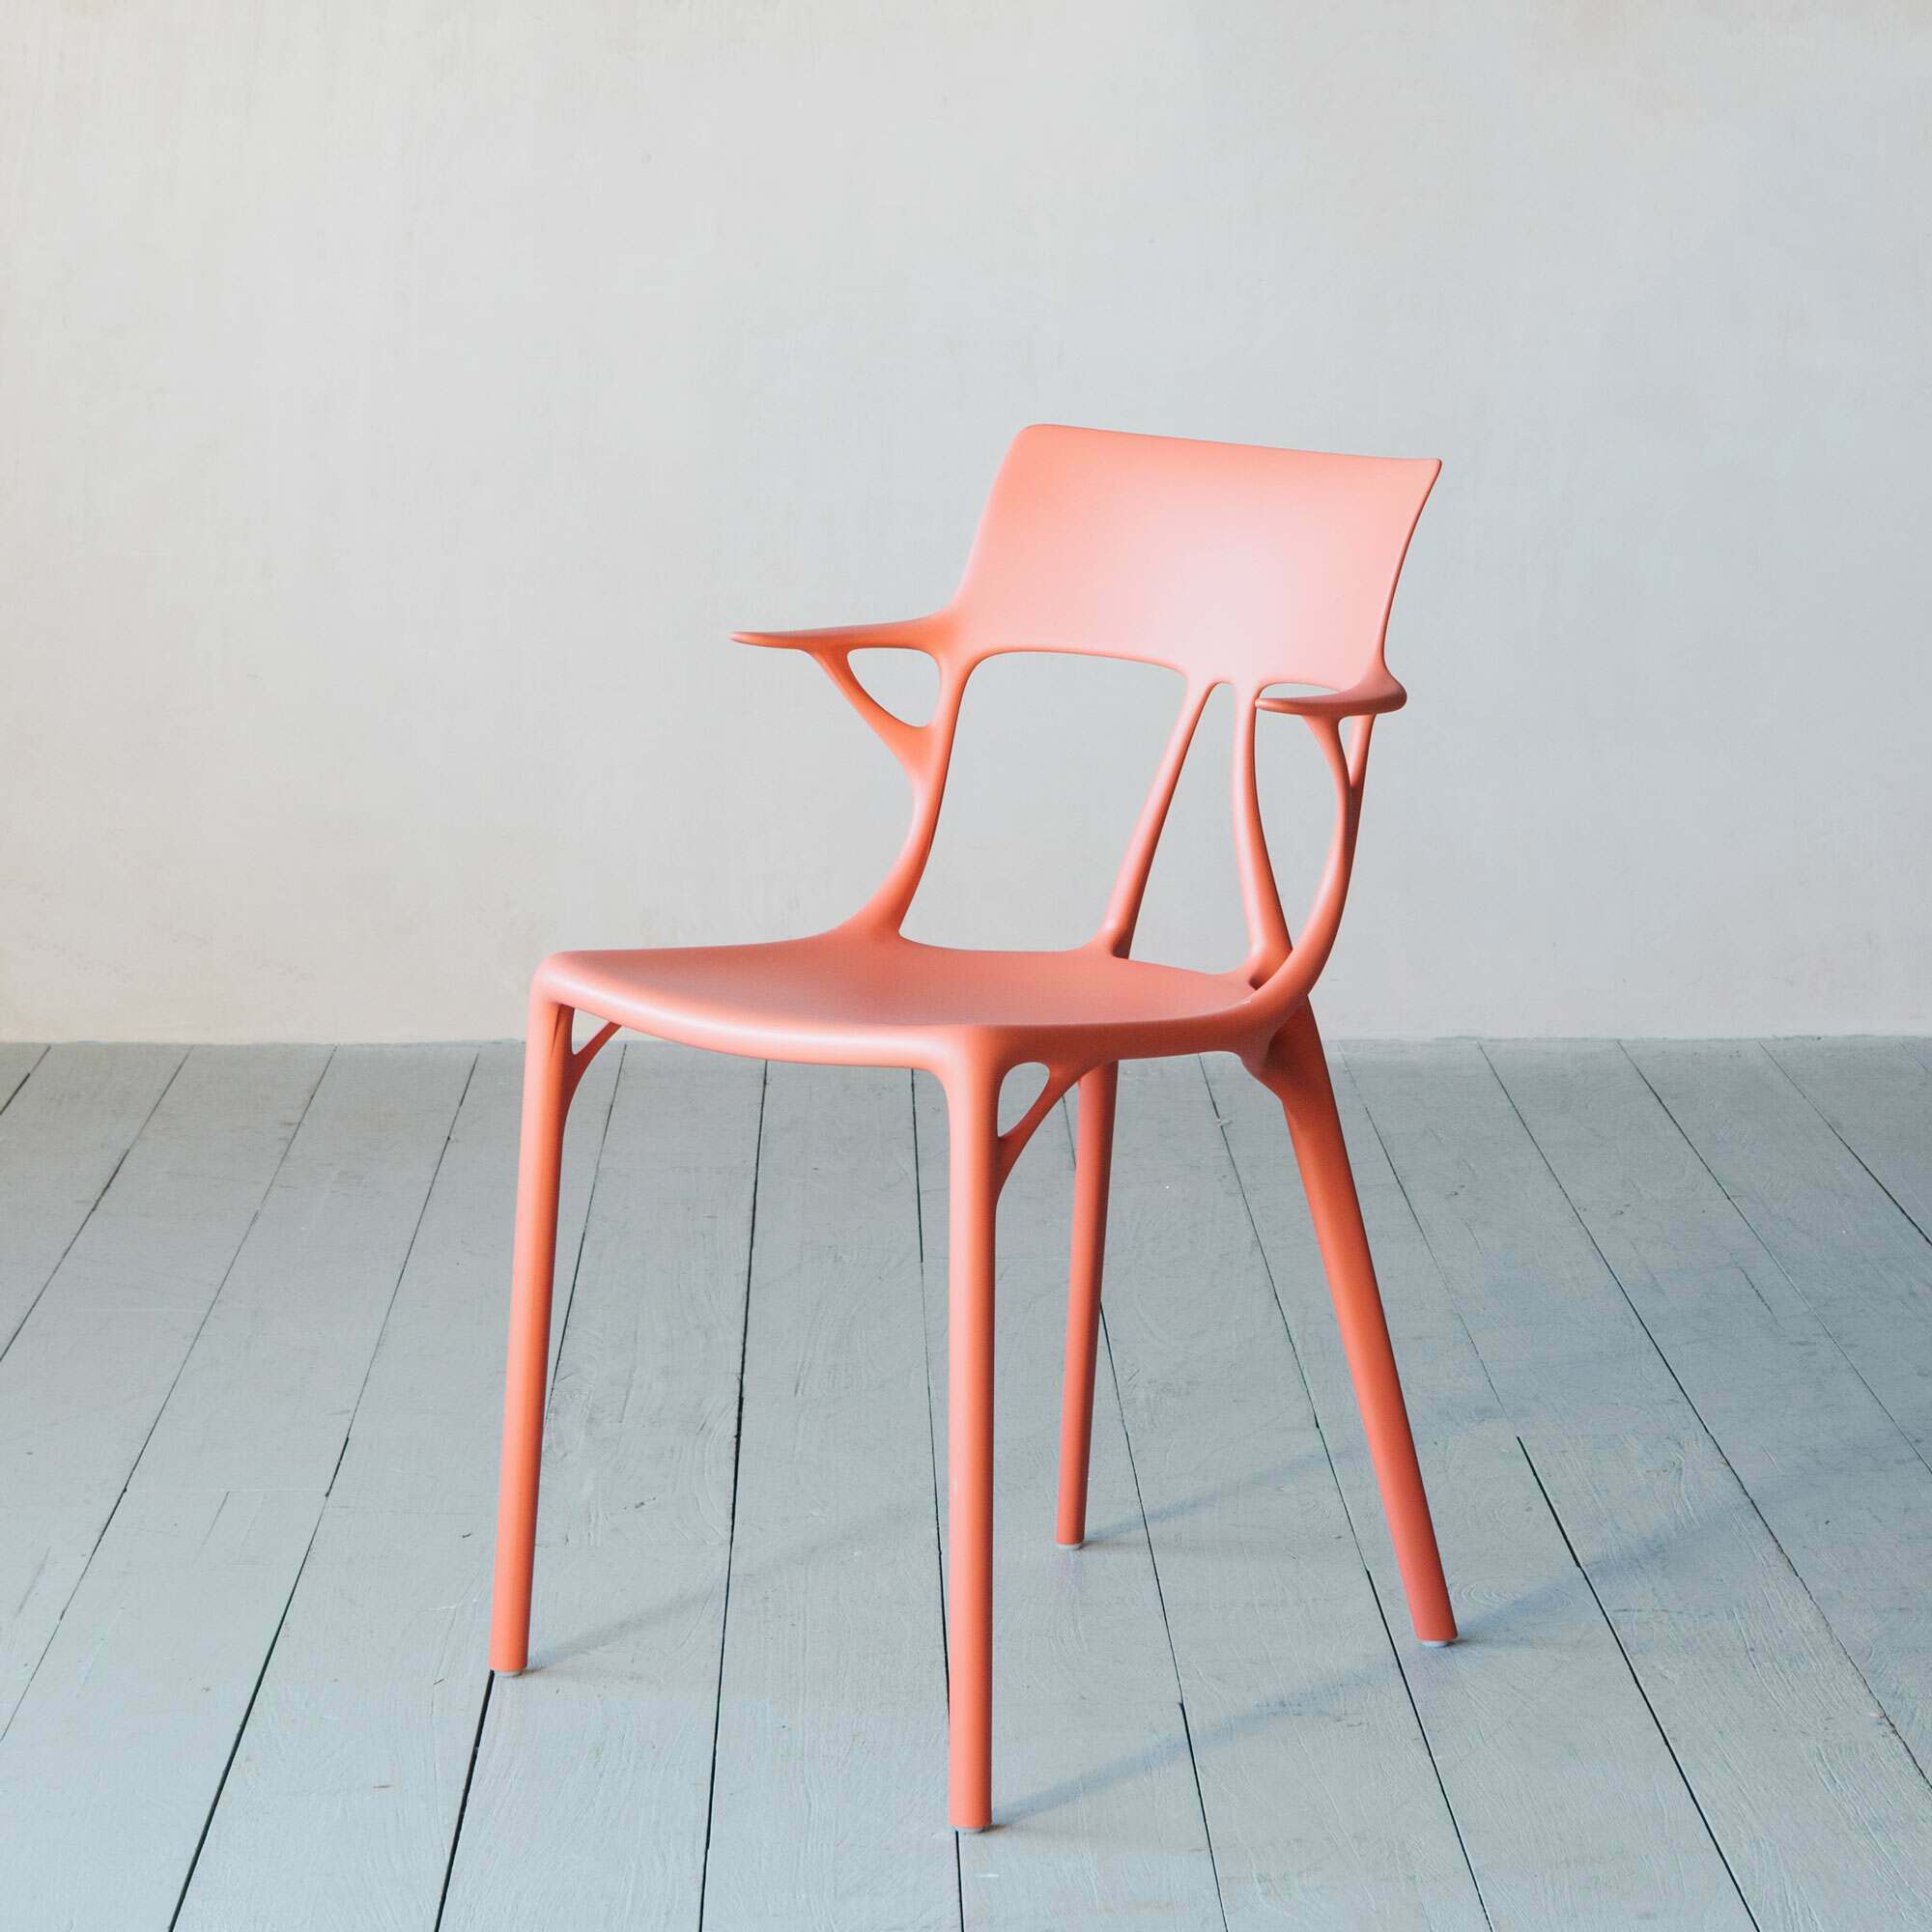 Read more about Graham and green kartell orange a.i chair